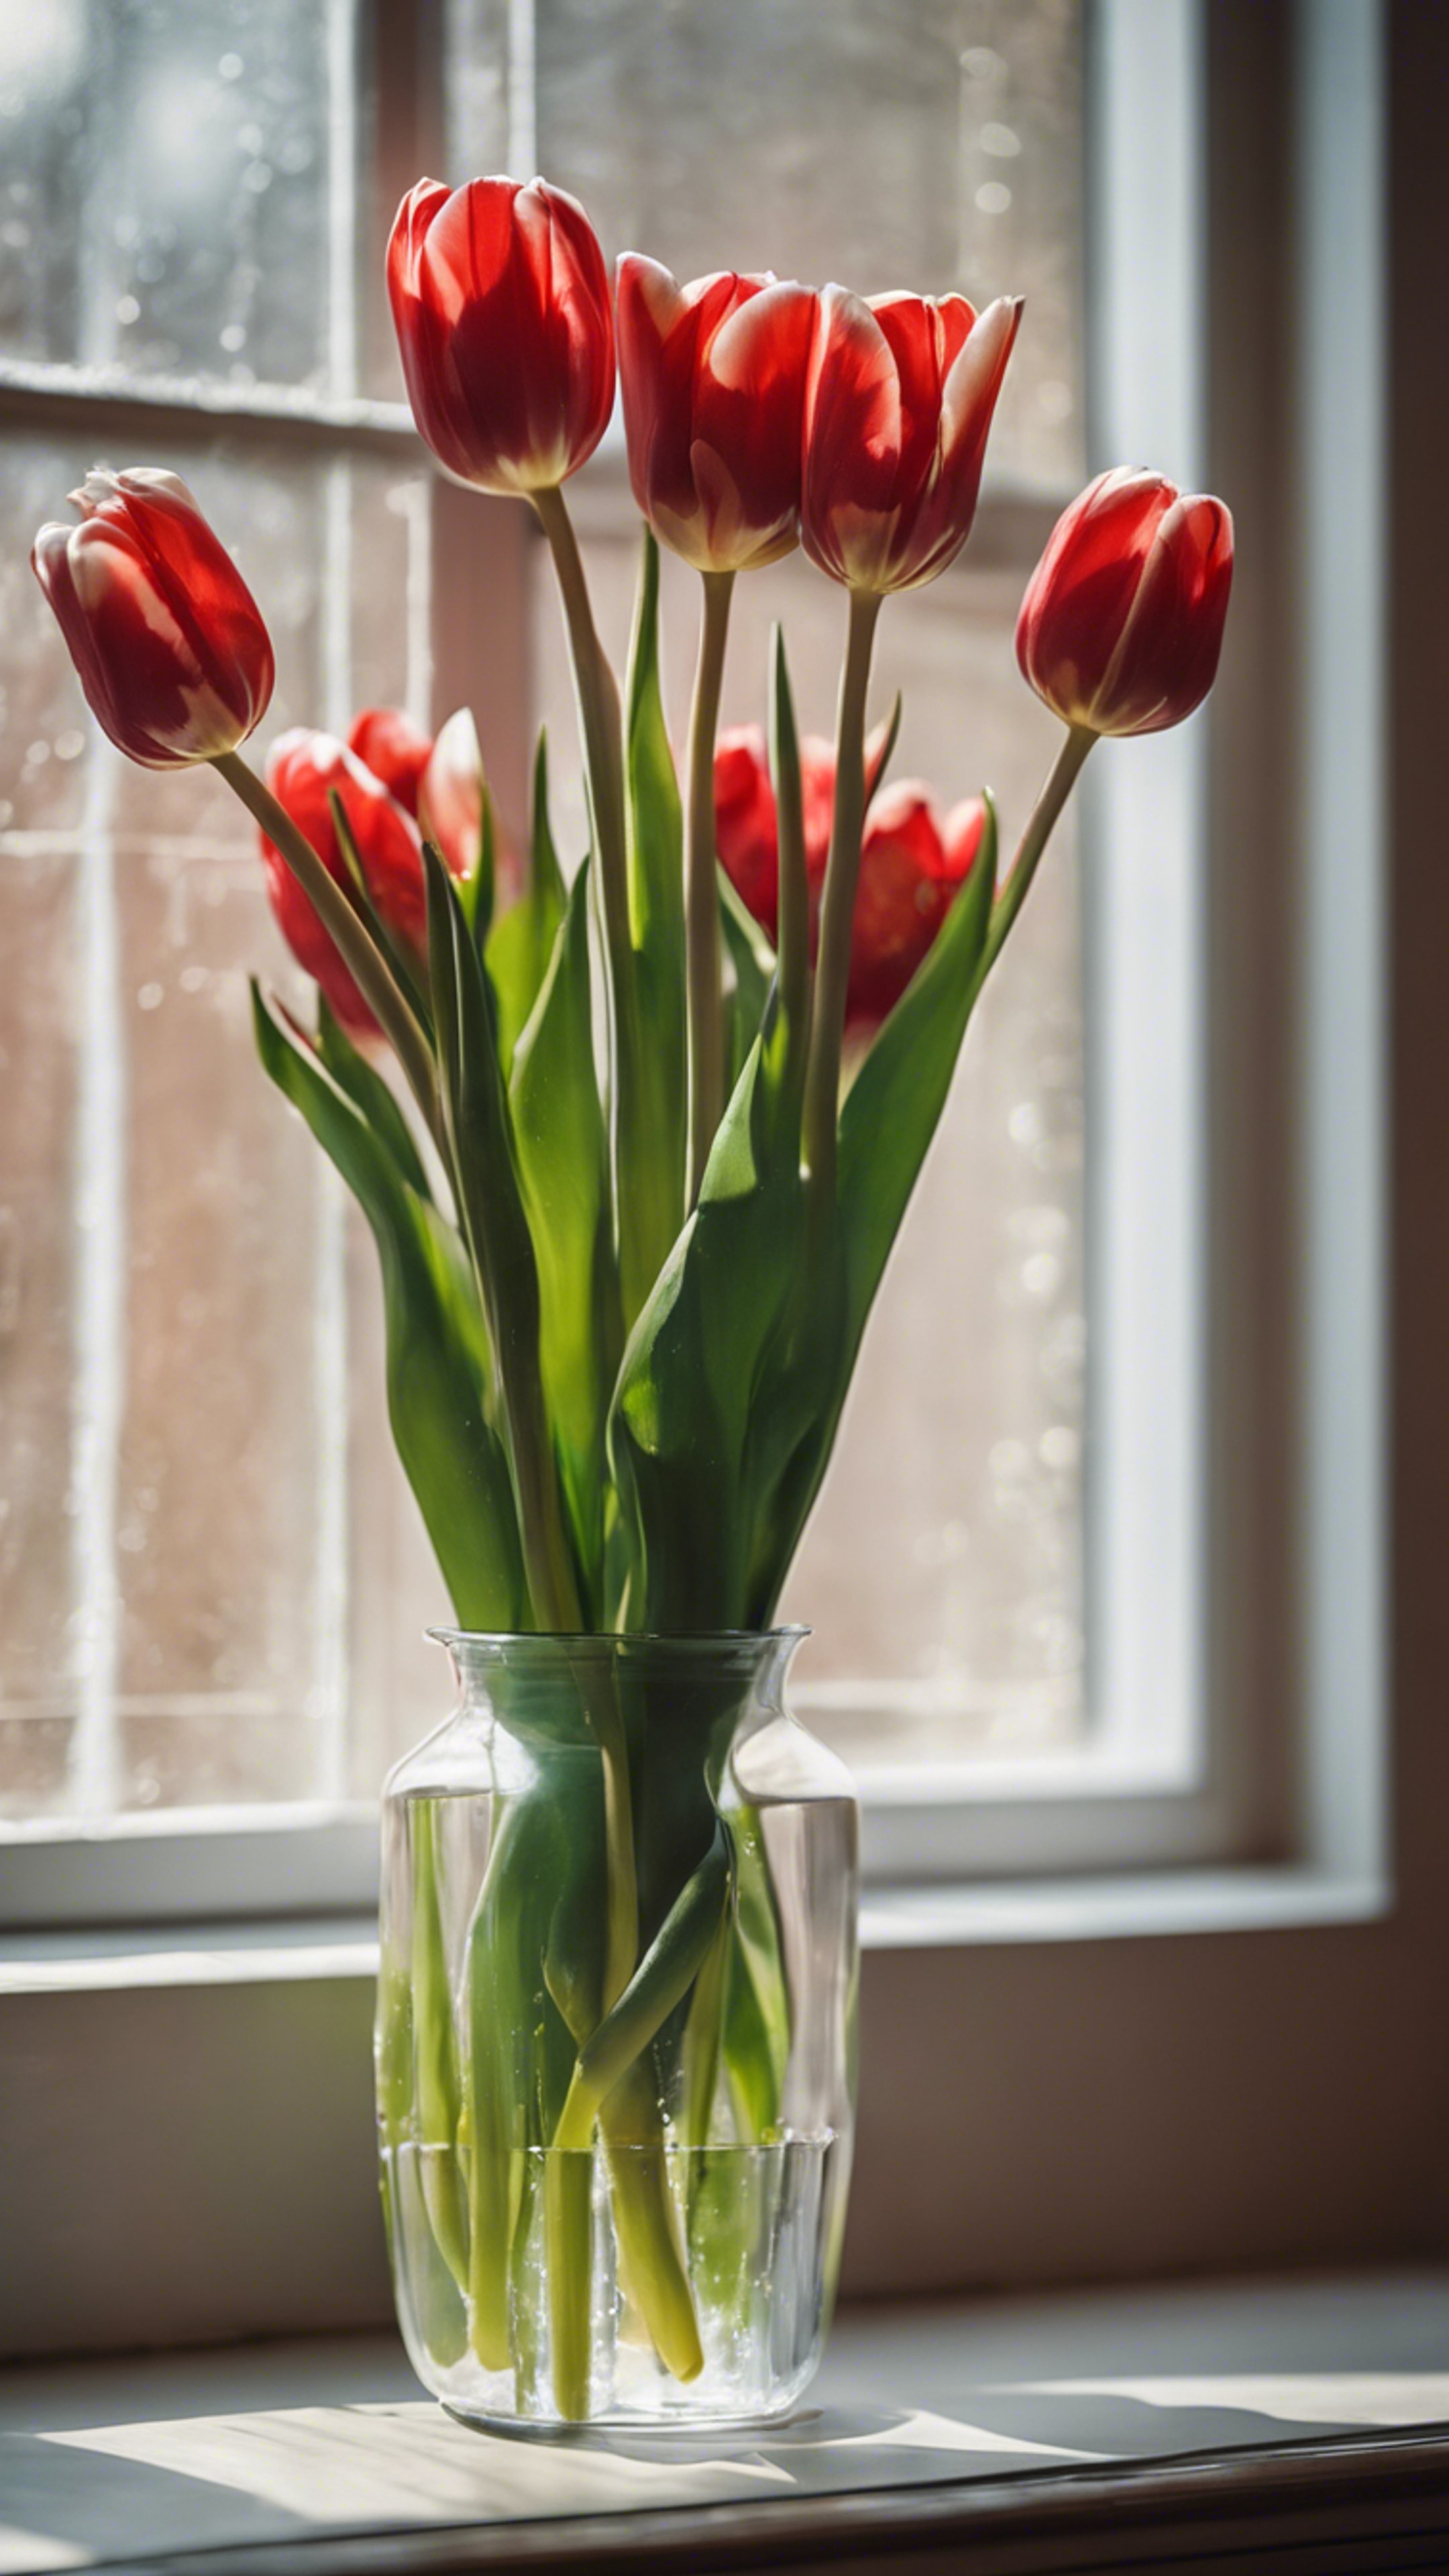 A bunch of vivid red and white tulips in a glass vase, lit by natural light. Wallpaper[fc69acd6917c413b913f]